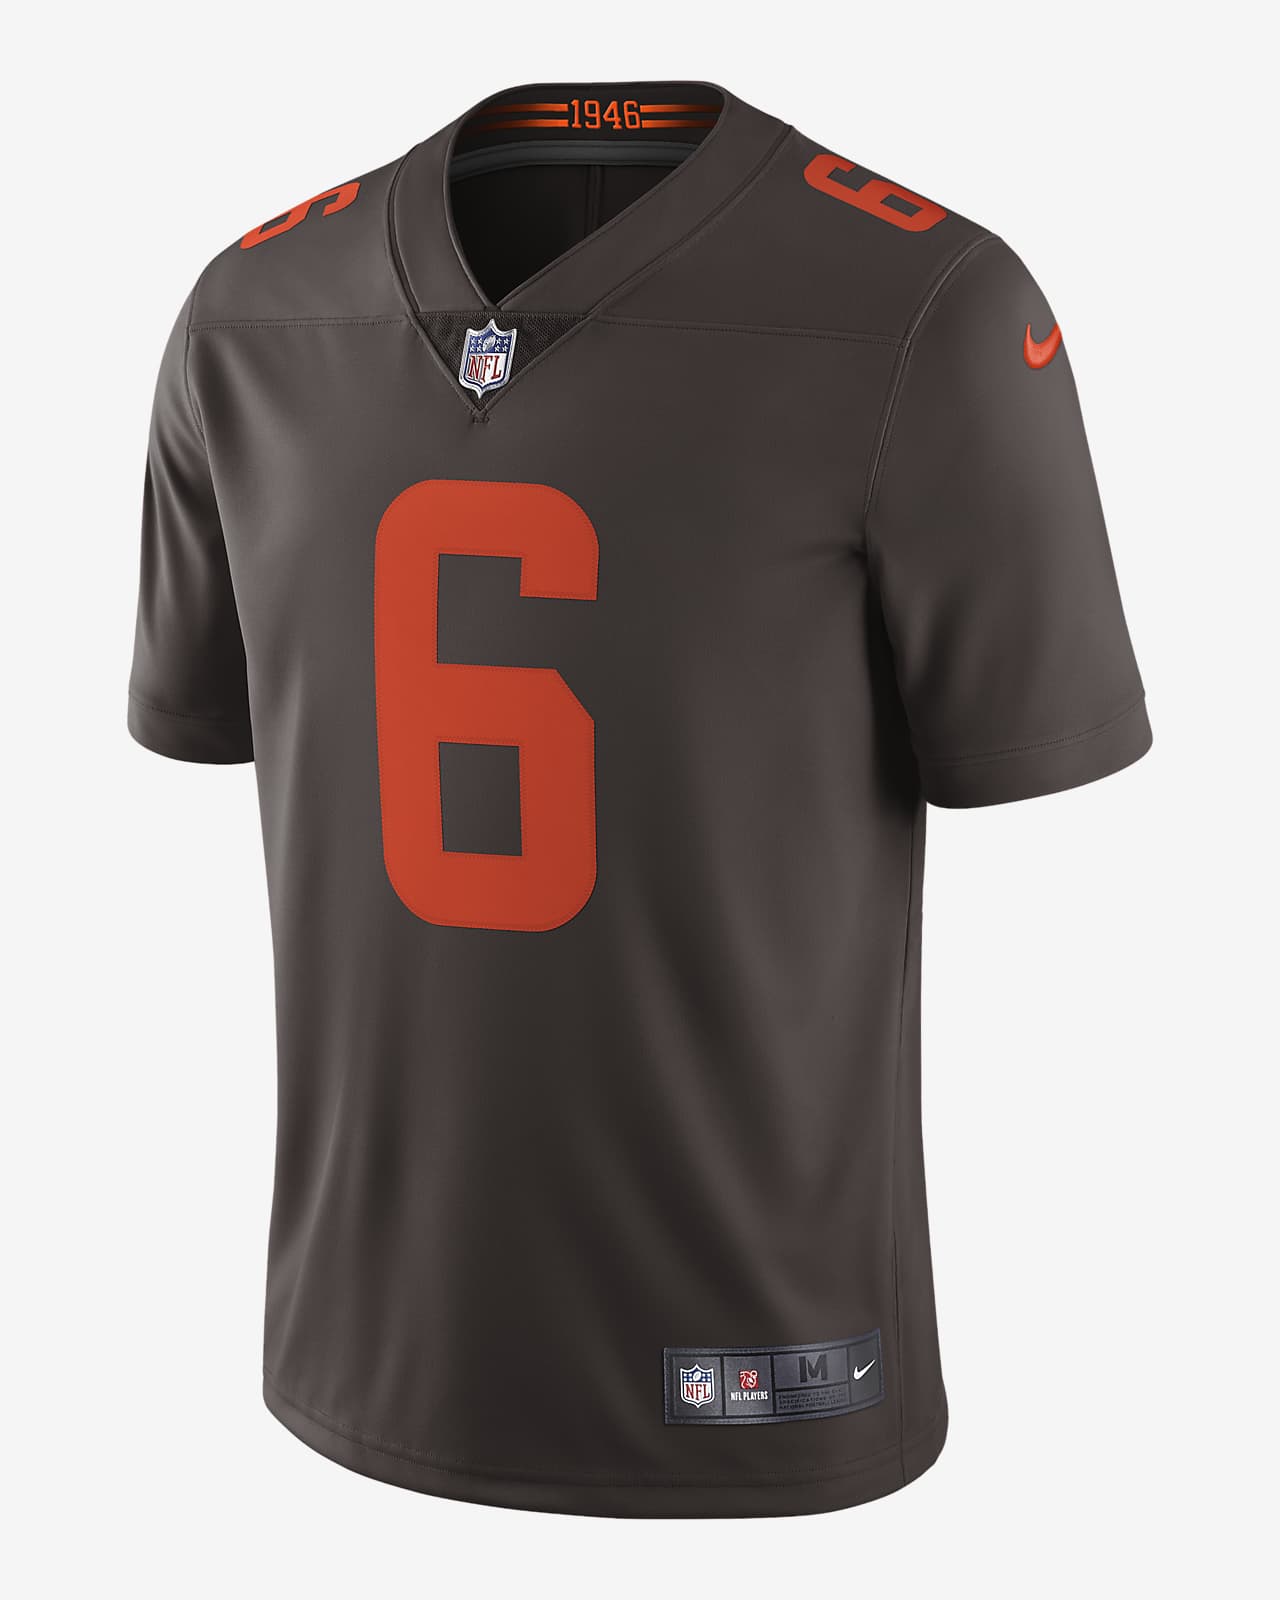 cleveland browns jersey mayfield